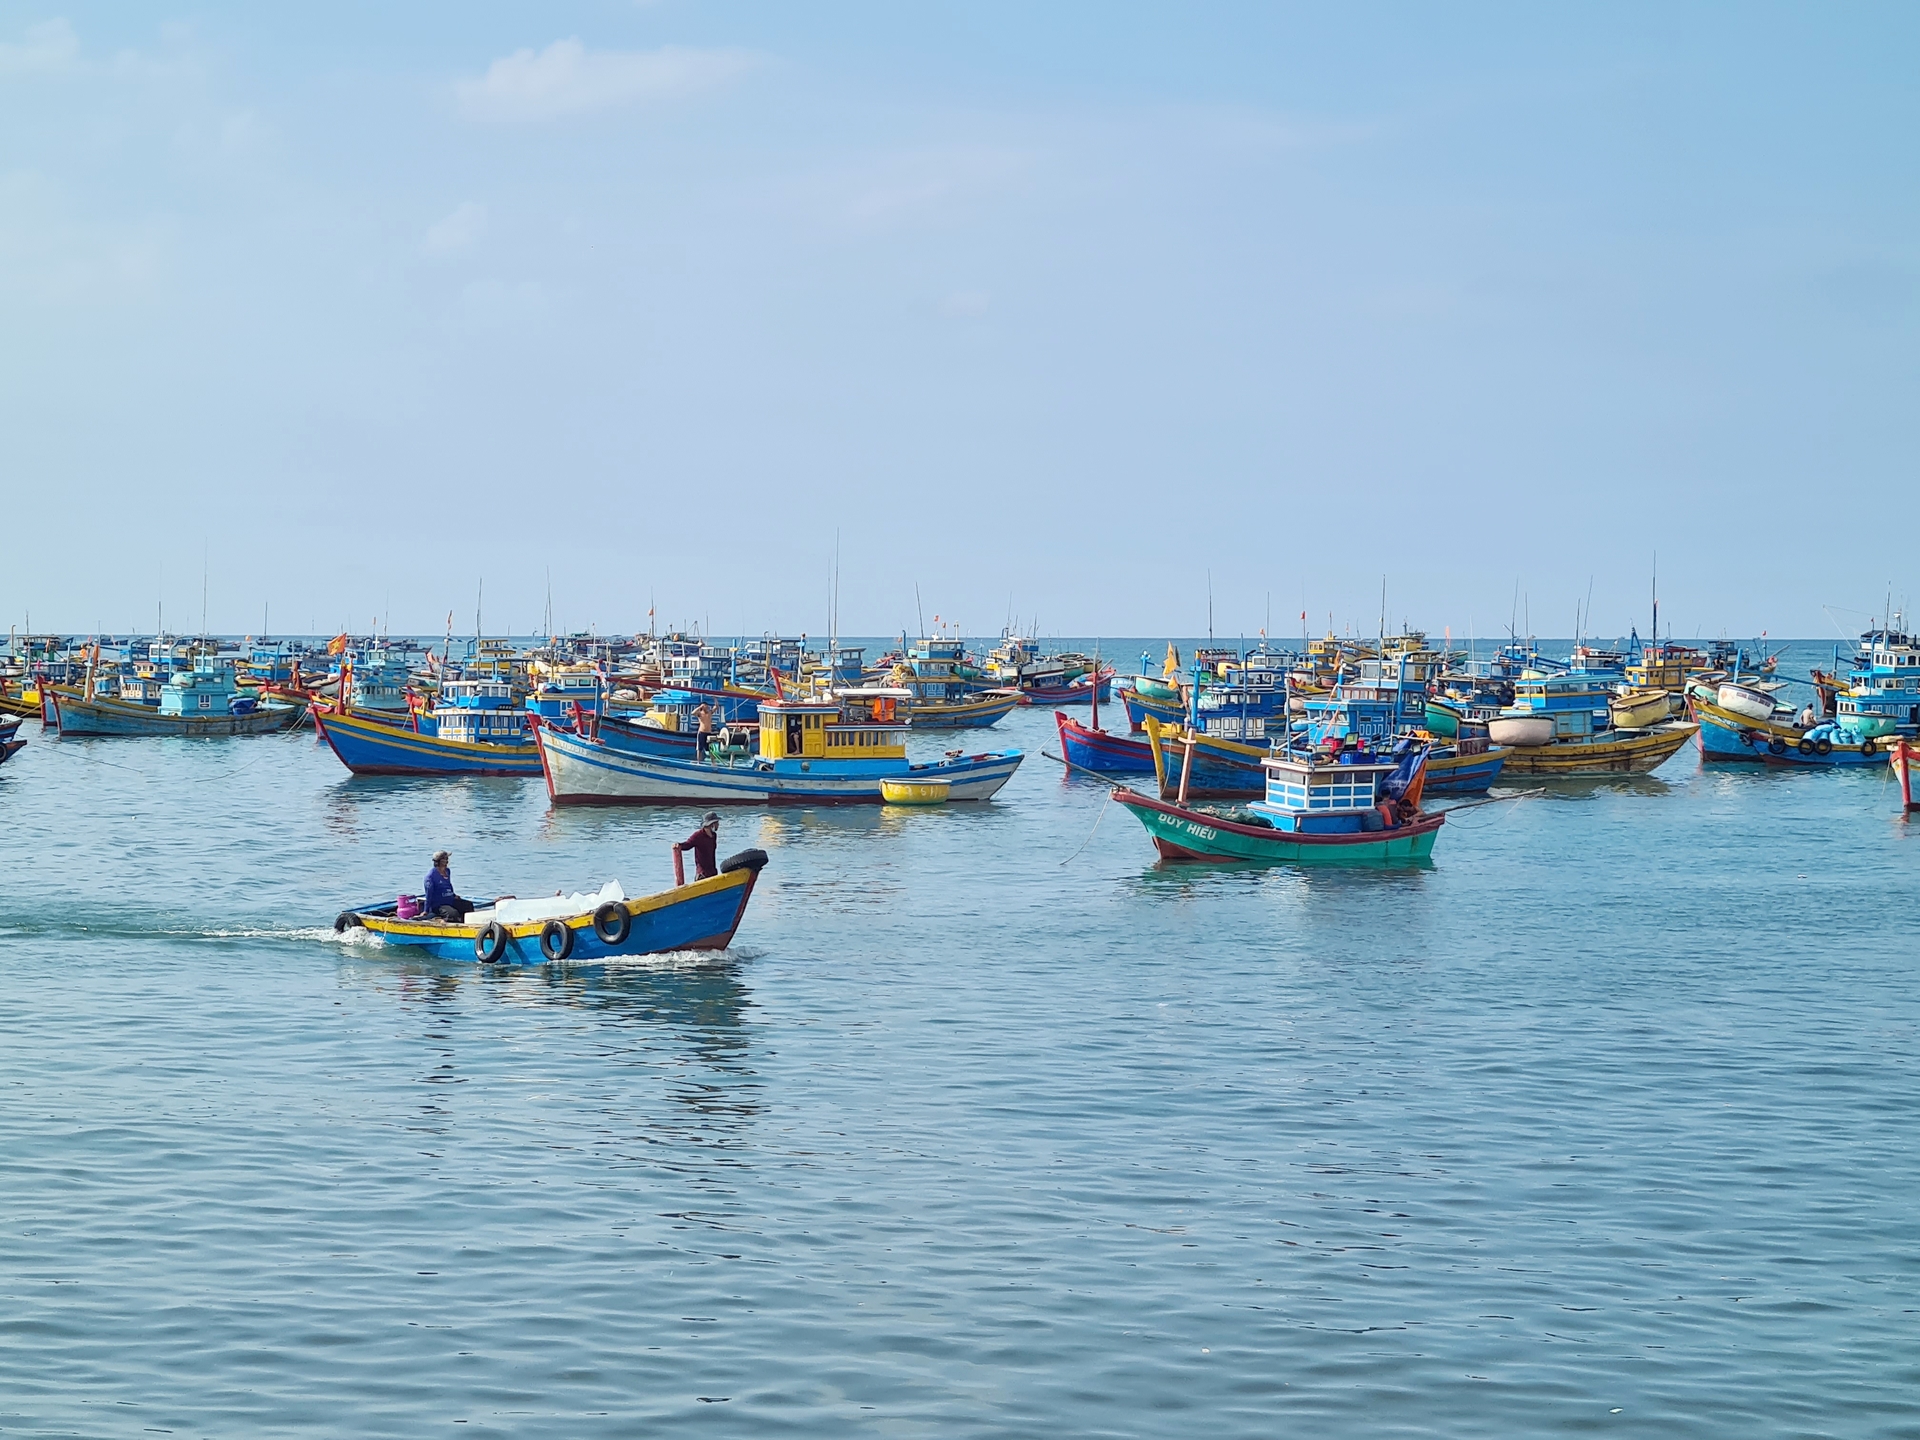 The process of verification and resolution is actively being undertaken in response to instances of non-compliance with regulations concerning the disconnection of VMS devices for fishing vessels measuring 24 meters or more. Photo: Hong Tham.